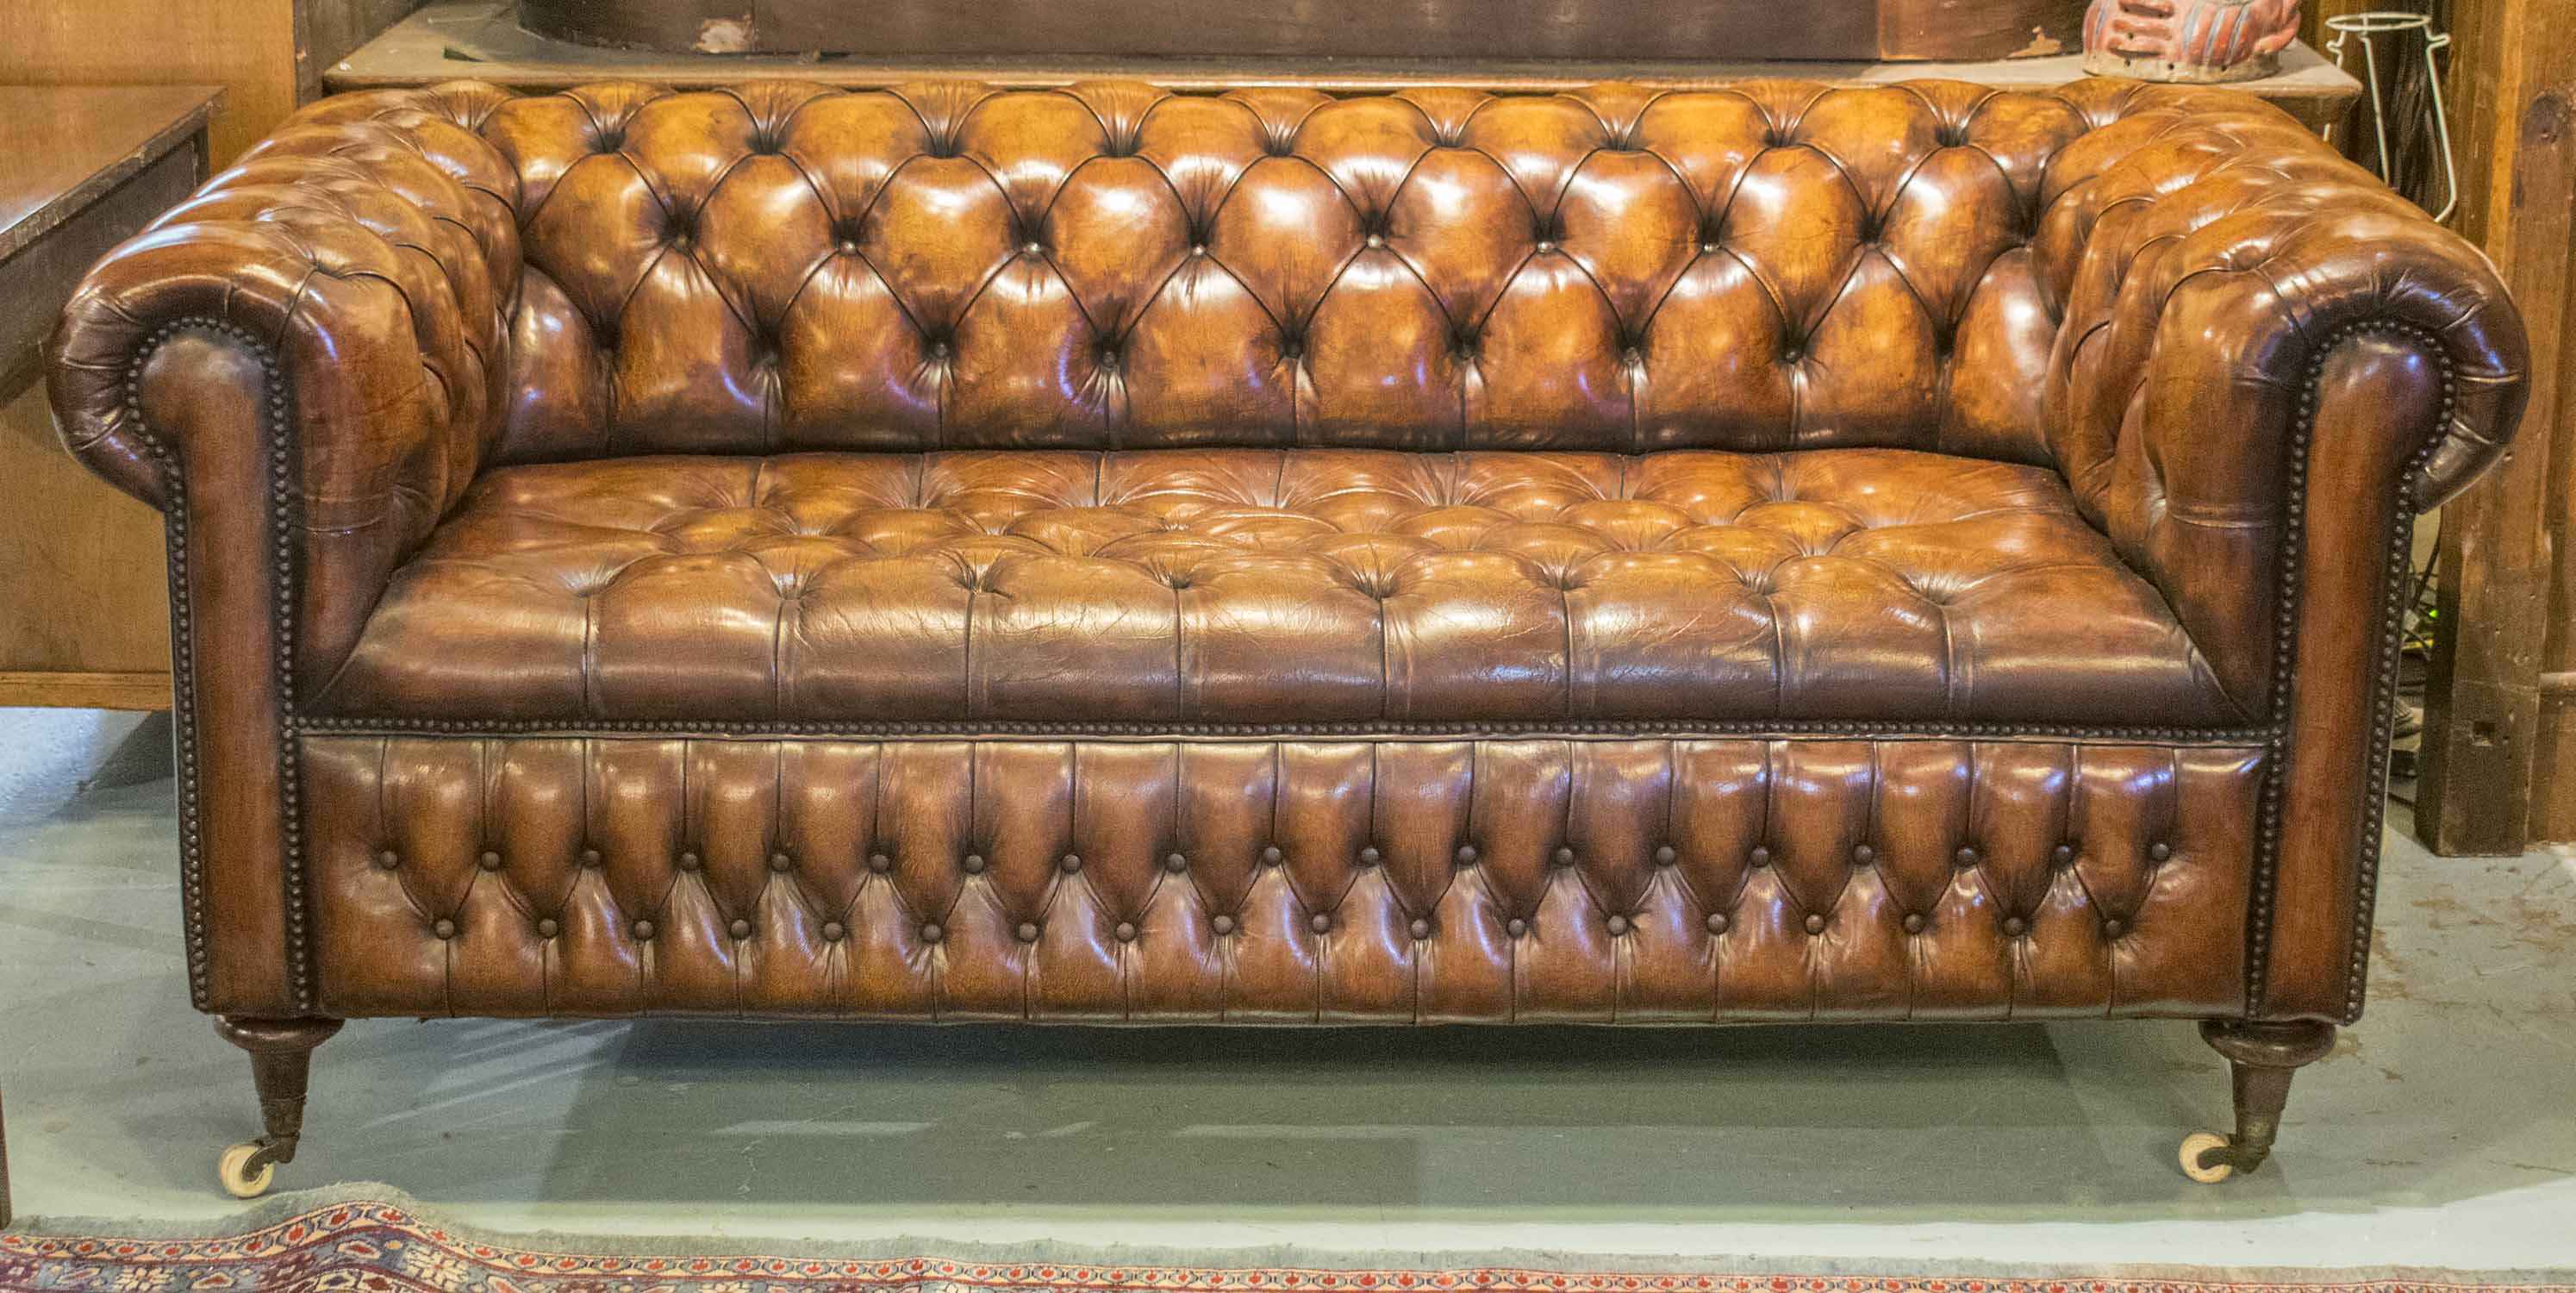 chesterfield square arm leather sofa